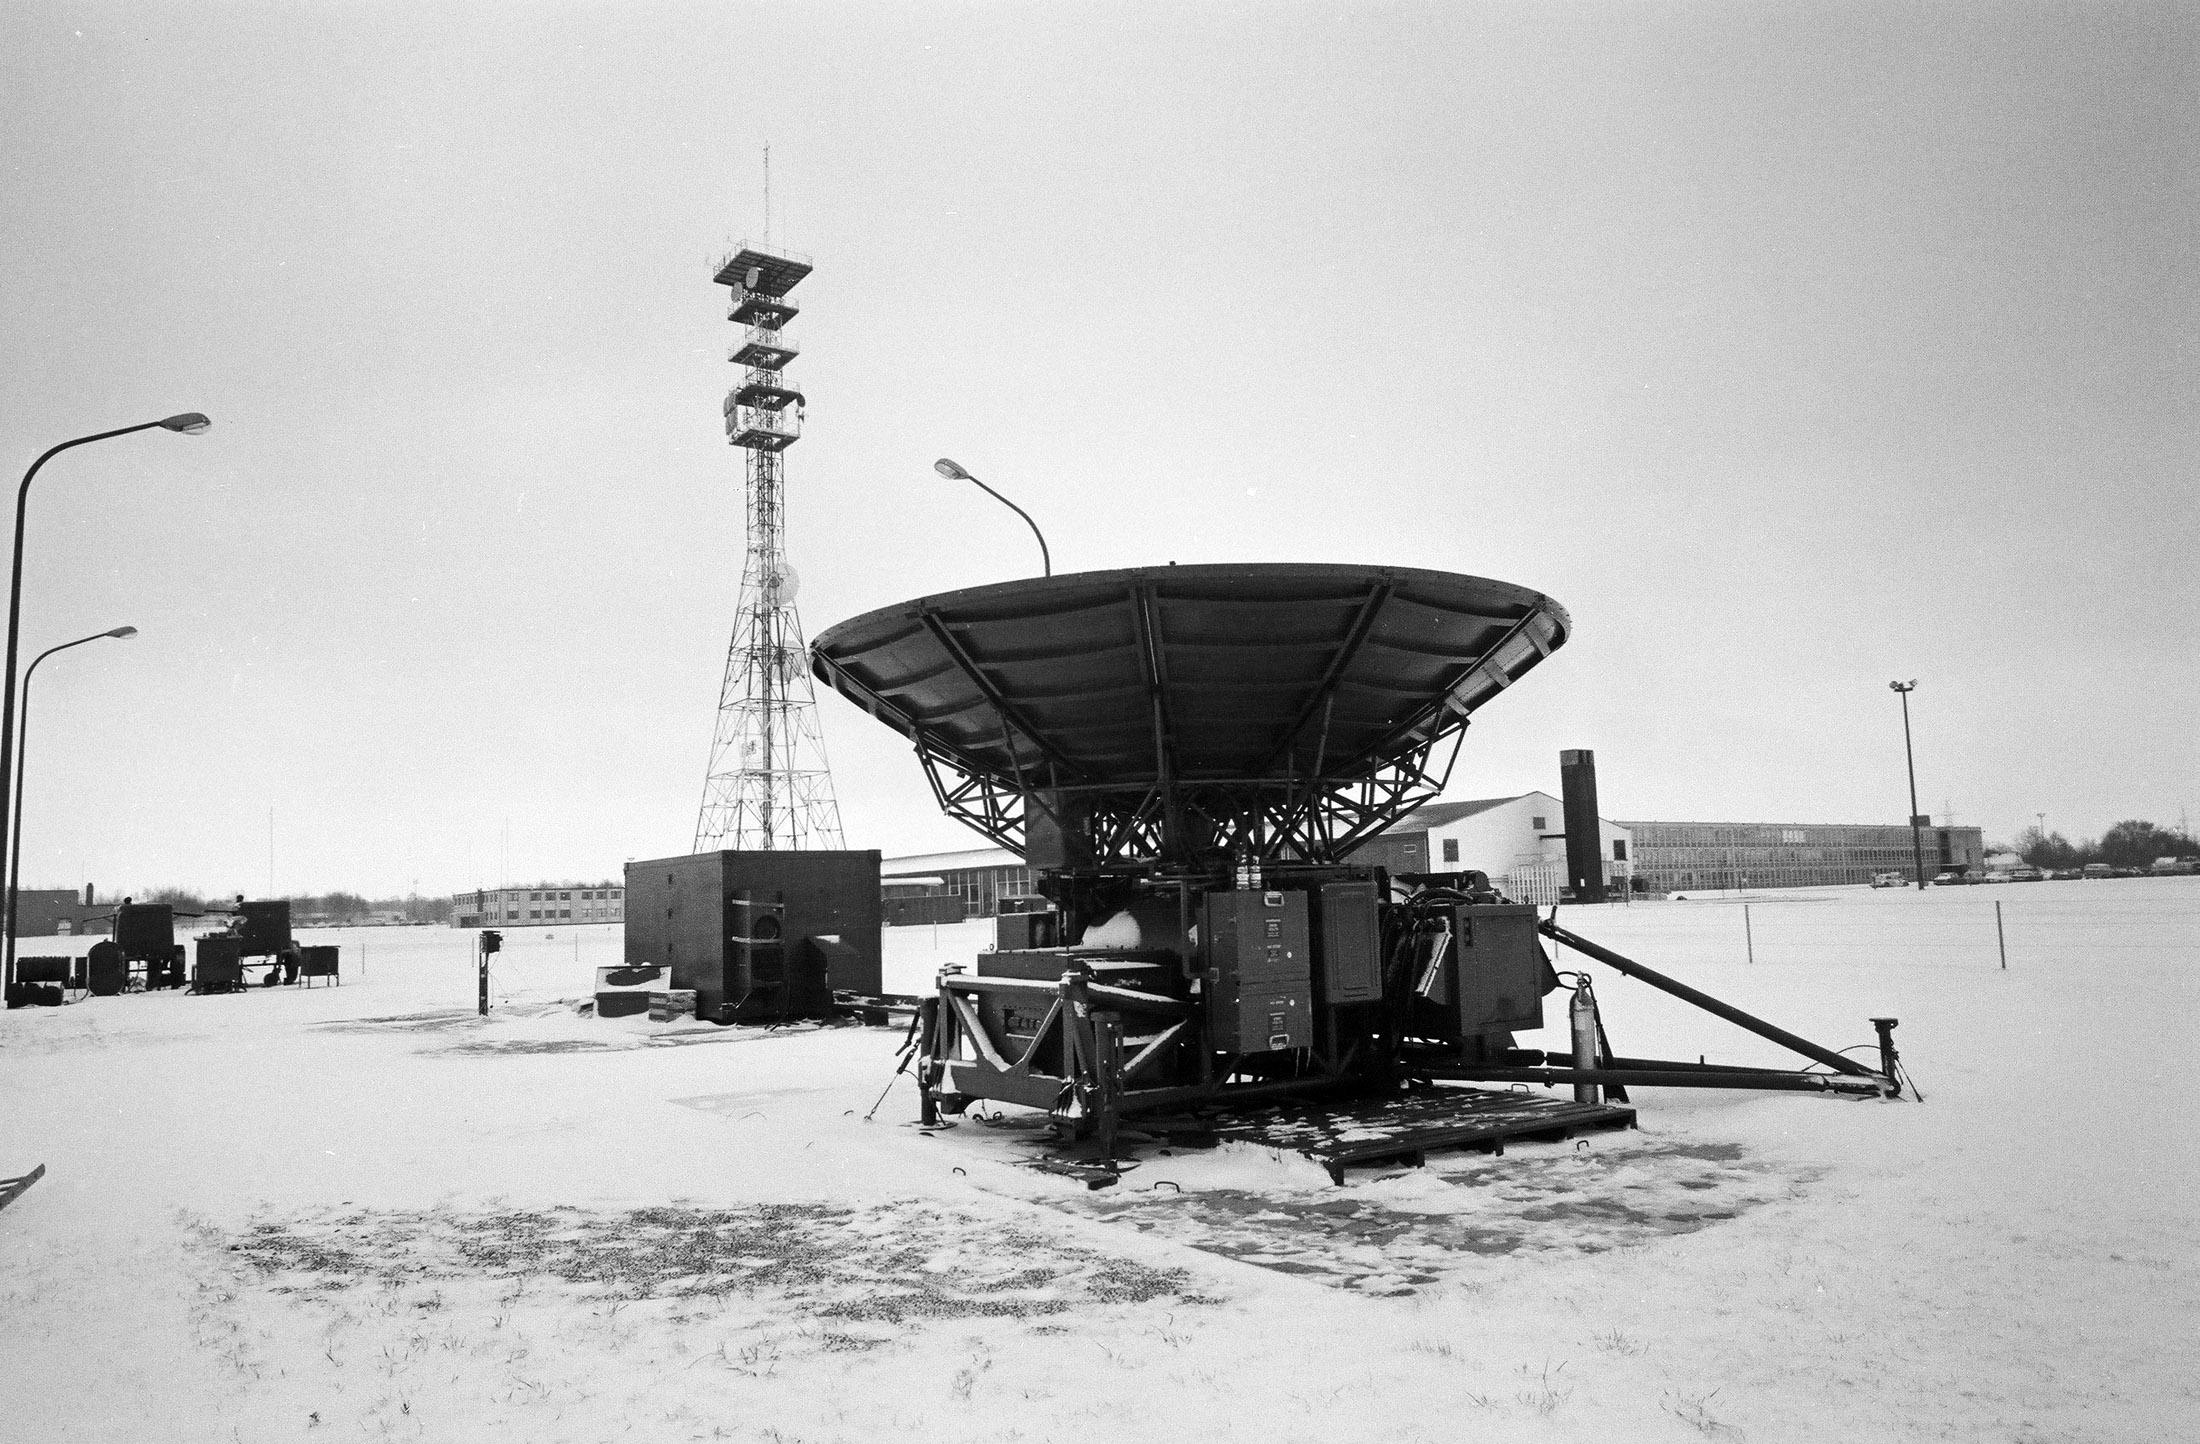 At the height of the programme, there were over 20 ground communication terminals.